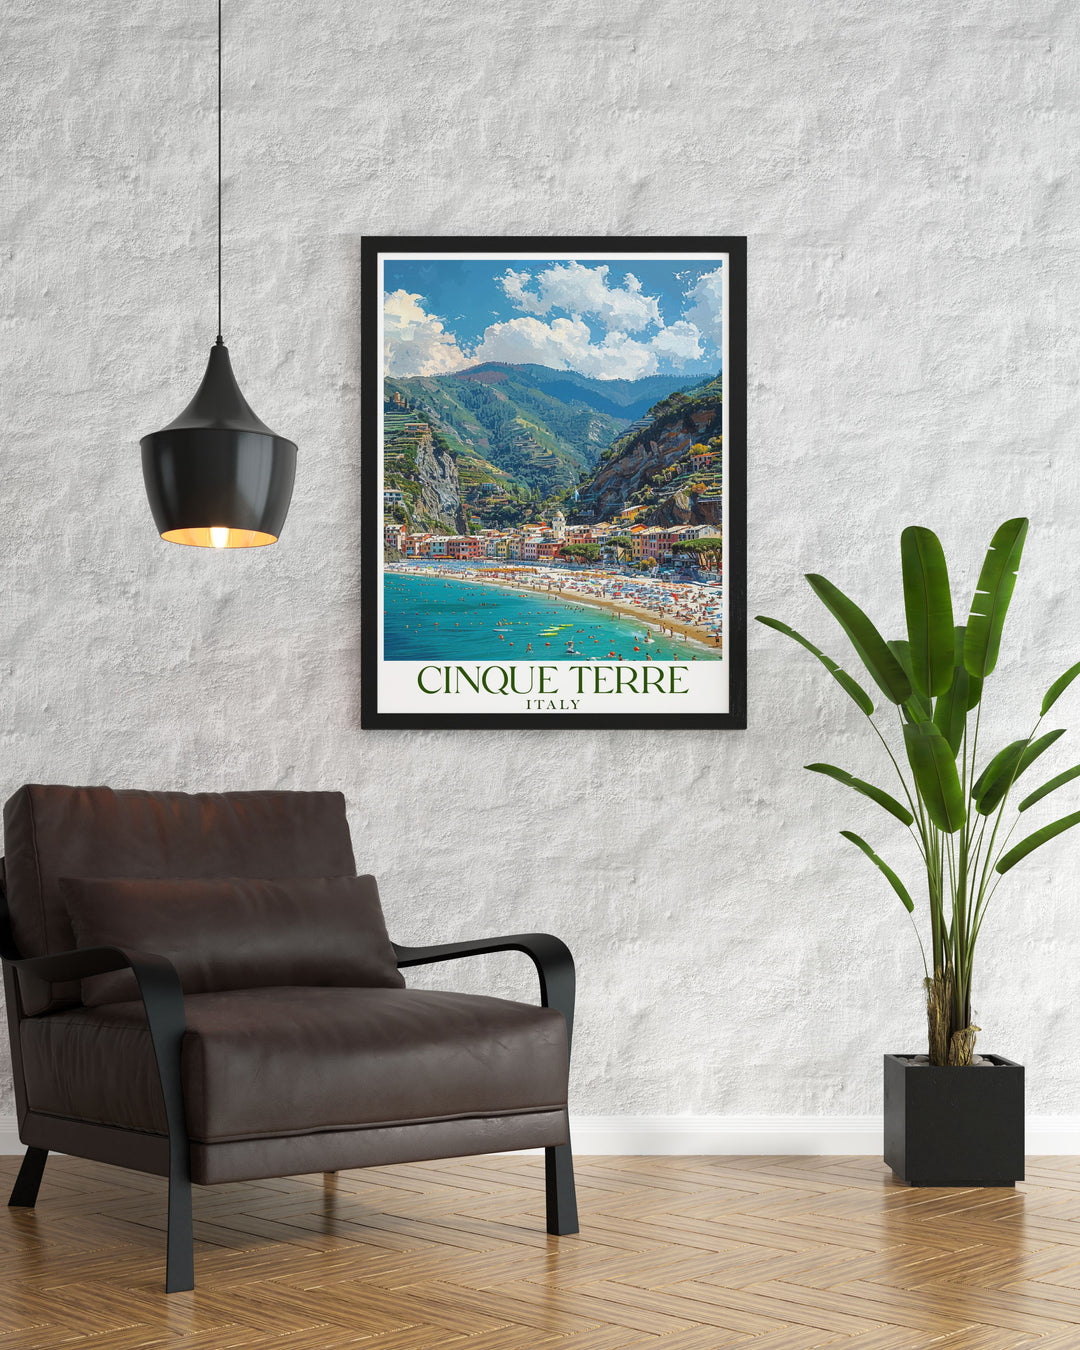 Cinque Terre art print of Monterosso al Mares beach an ideal gift for any occasion including anniversary gifts birthday gifts and Christmas gifts a thoughtful and timeless present that will be cherished by friends and loved ones.